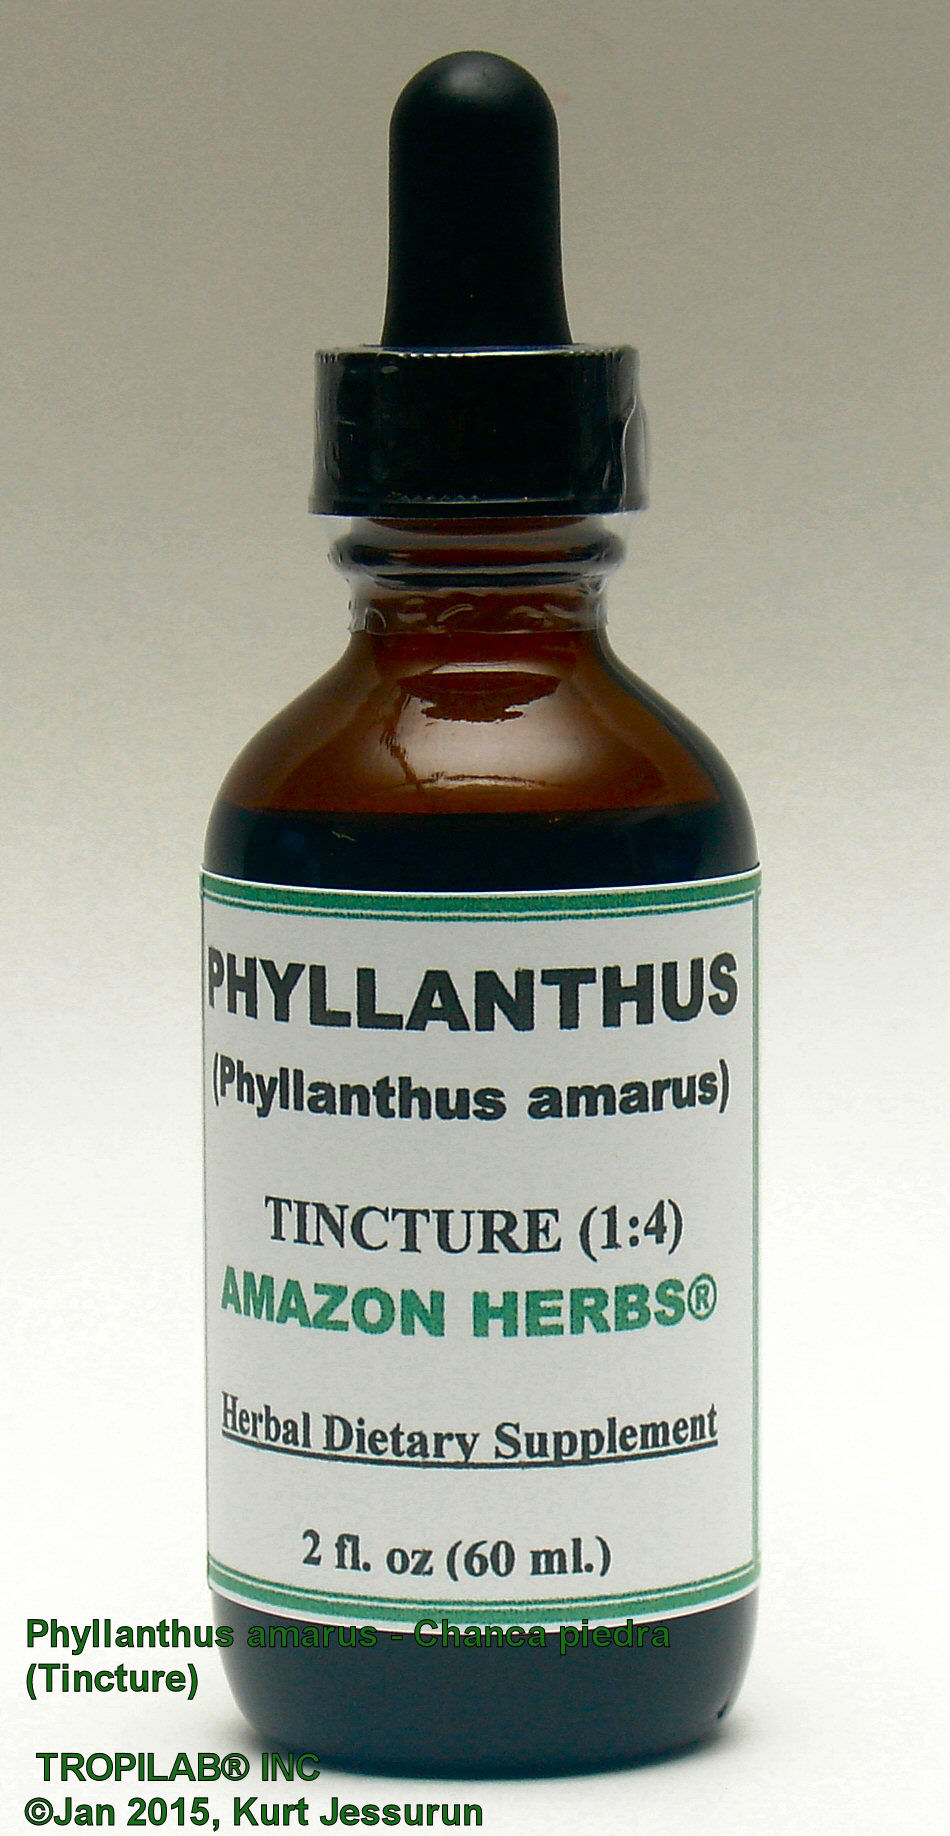 Phyllanthus amarus, Chanca piedra herbal tincture ($20.45 per 2 fl oz); is used extensively for liver, kidney and gall bladder
 function. Also used against diabetes, frequent menstruation, gonorrhea, gout and jaundice.